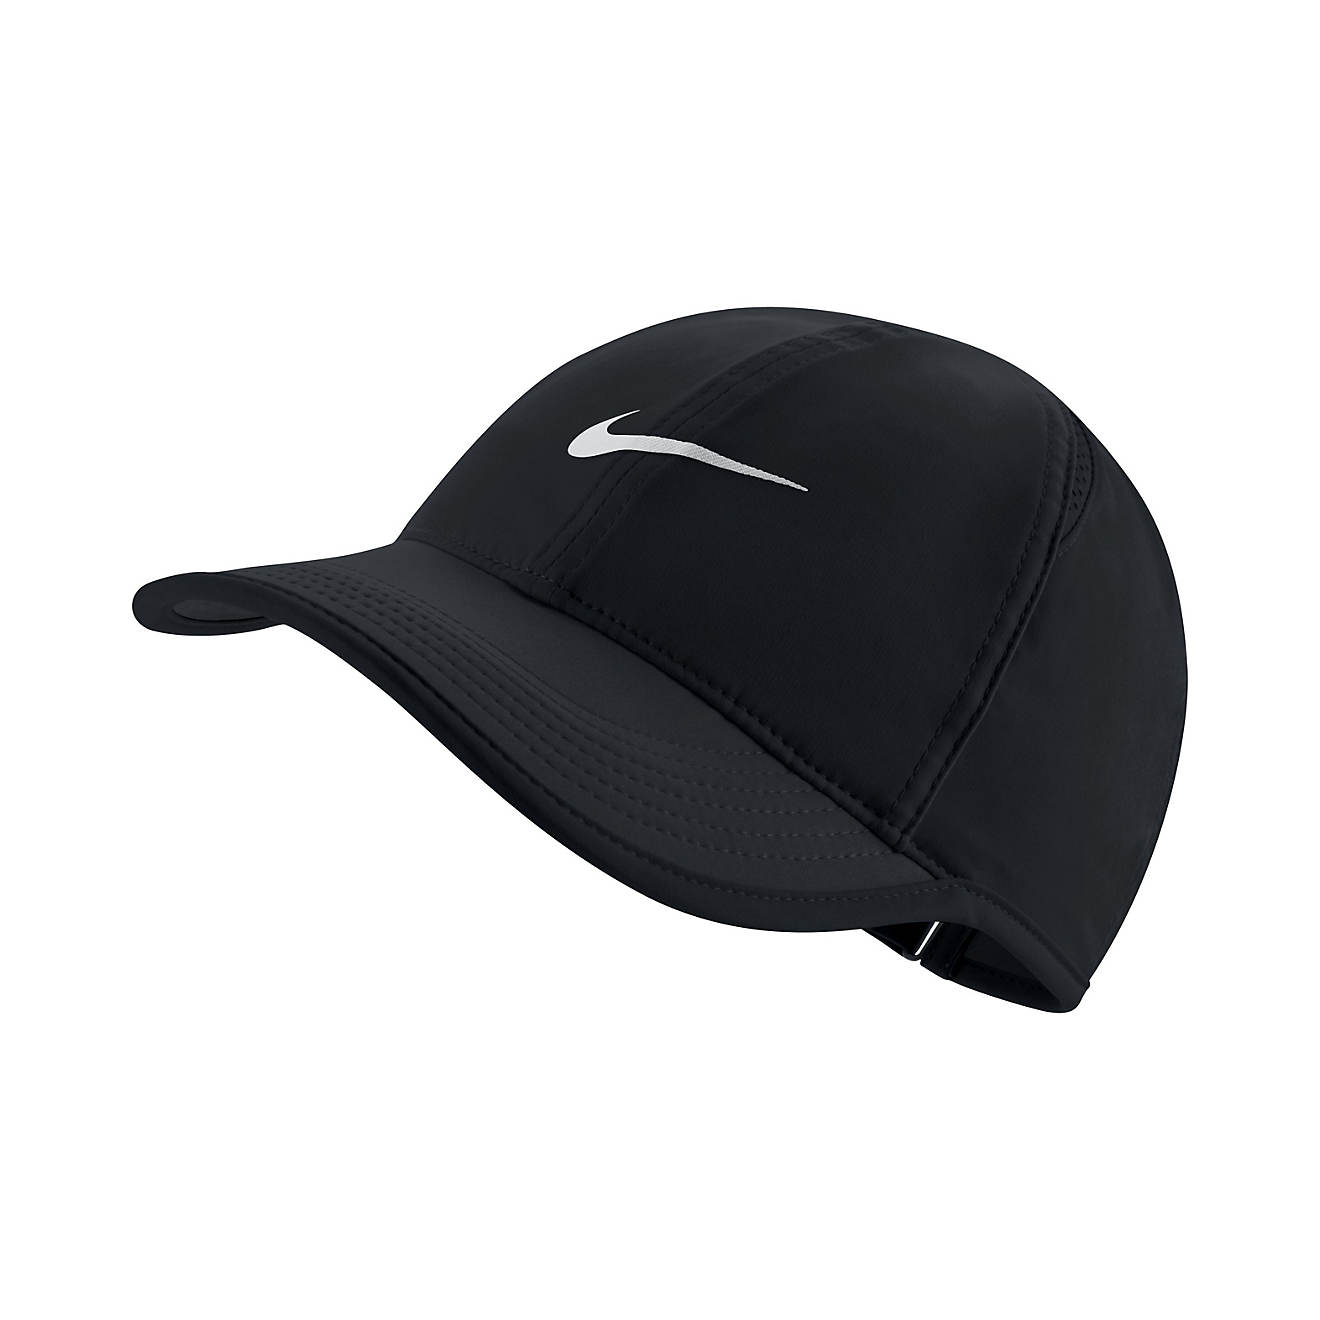 Nike Women's Featherlight 2.0 Cap                                                                                                - view number 1